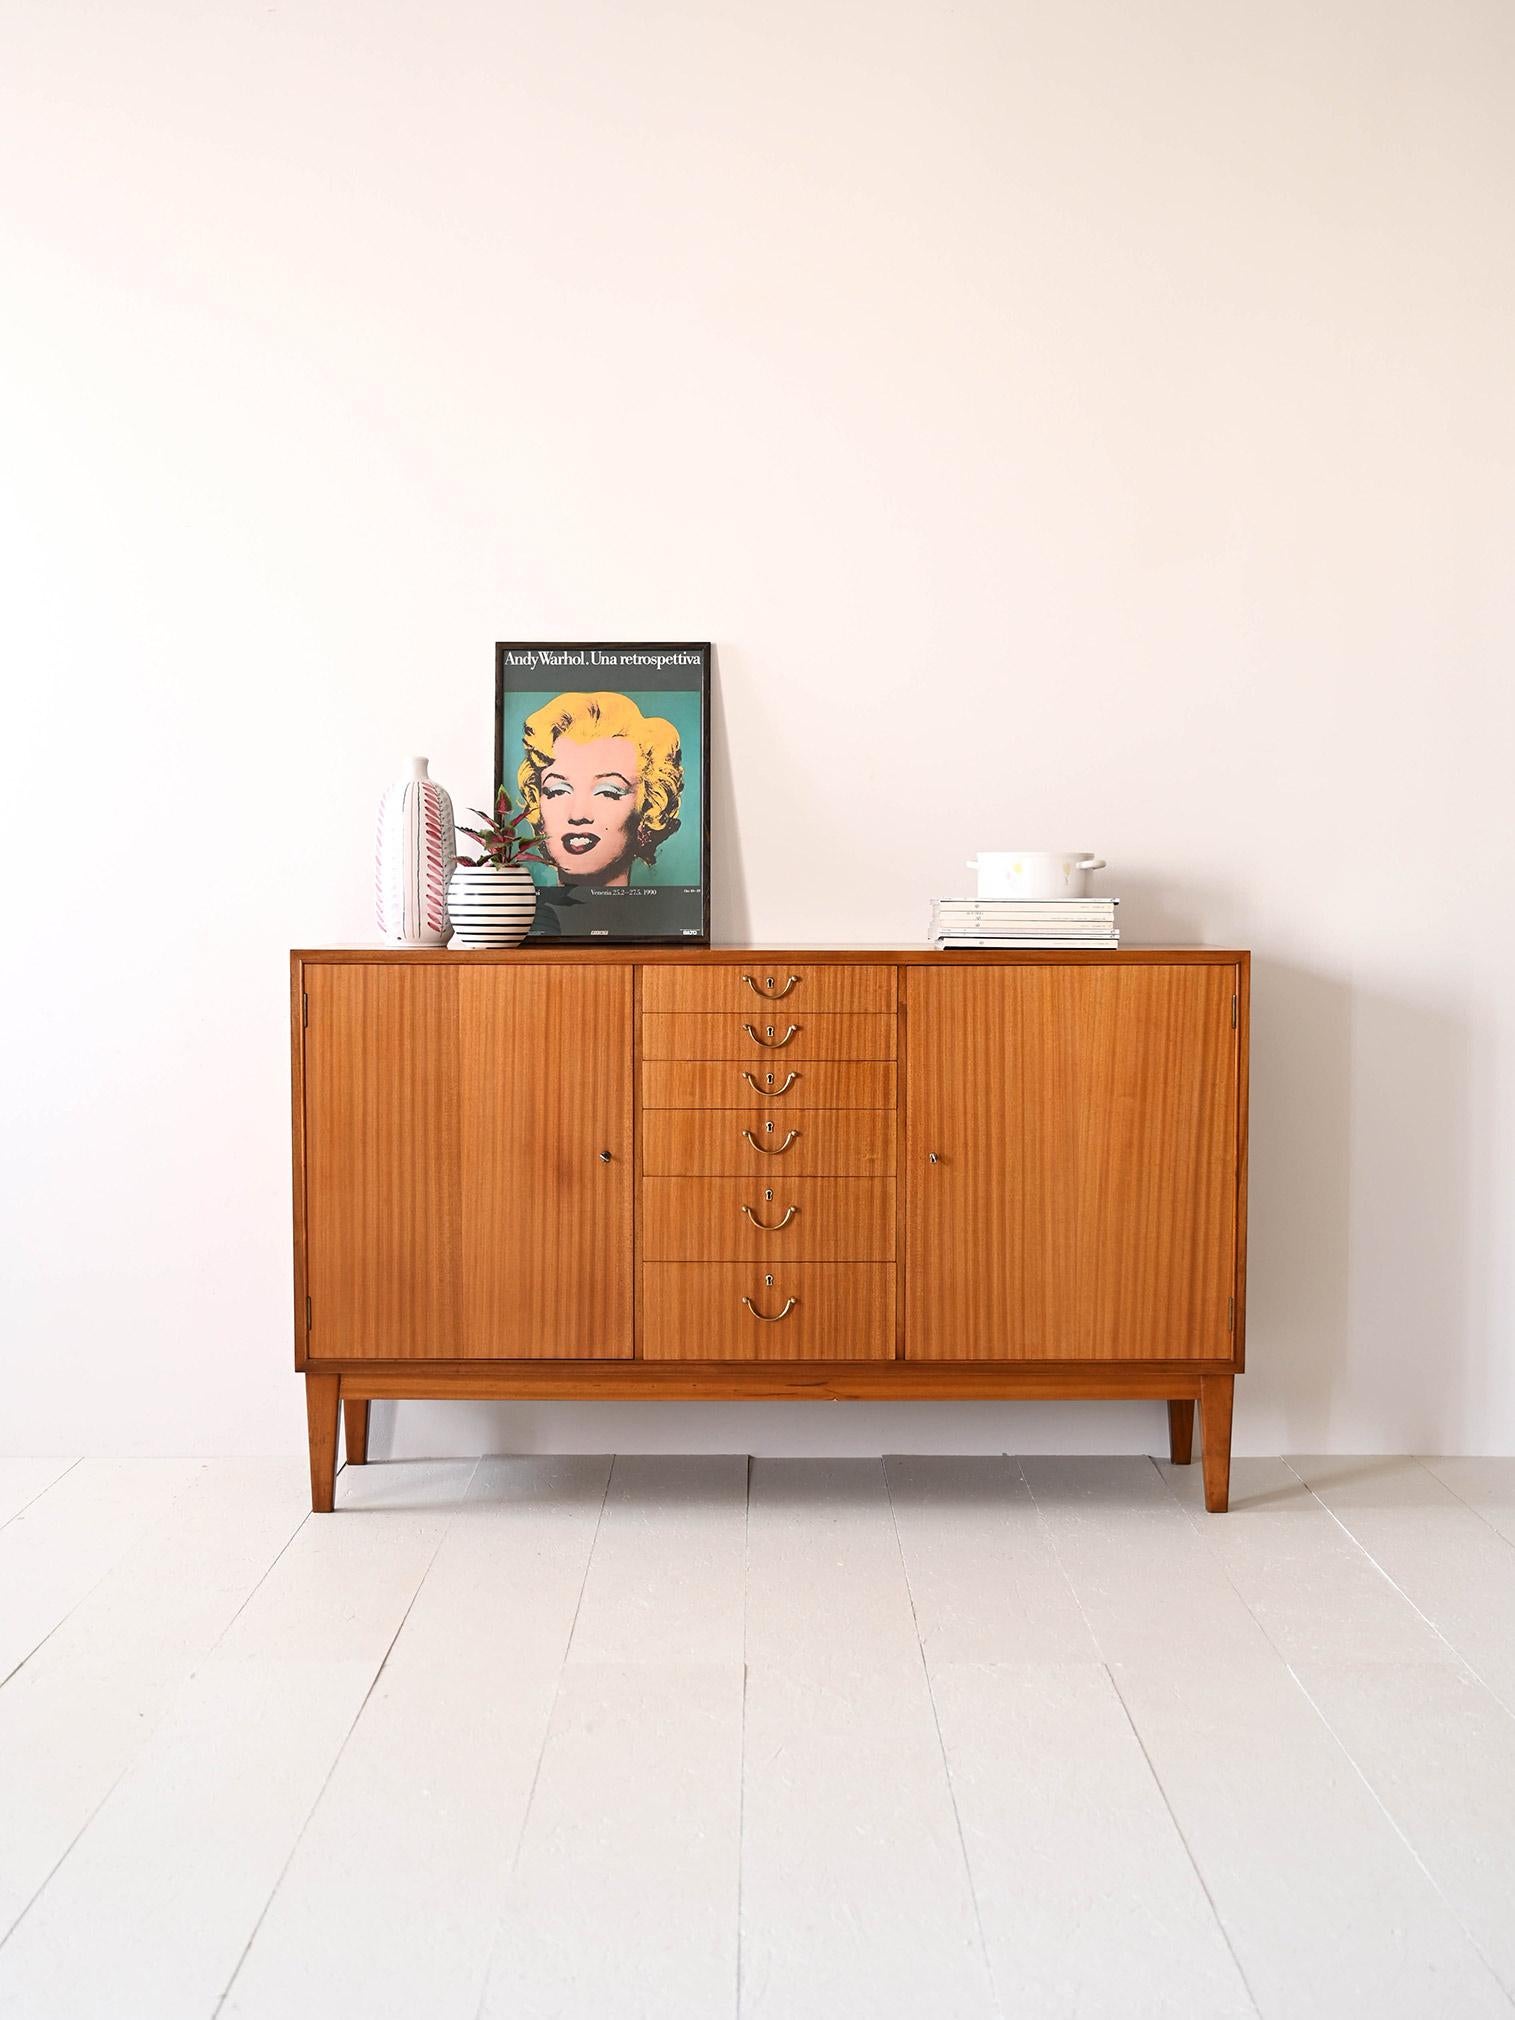 1950s sideboard cabinet of Scandinavian provenance with central drawers.

A piece of furniture that traces the lines of mid-century design.  The six drawers with metal handles are located in the center of the cabinet, while on either side are two